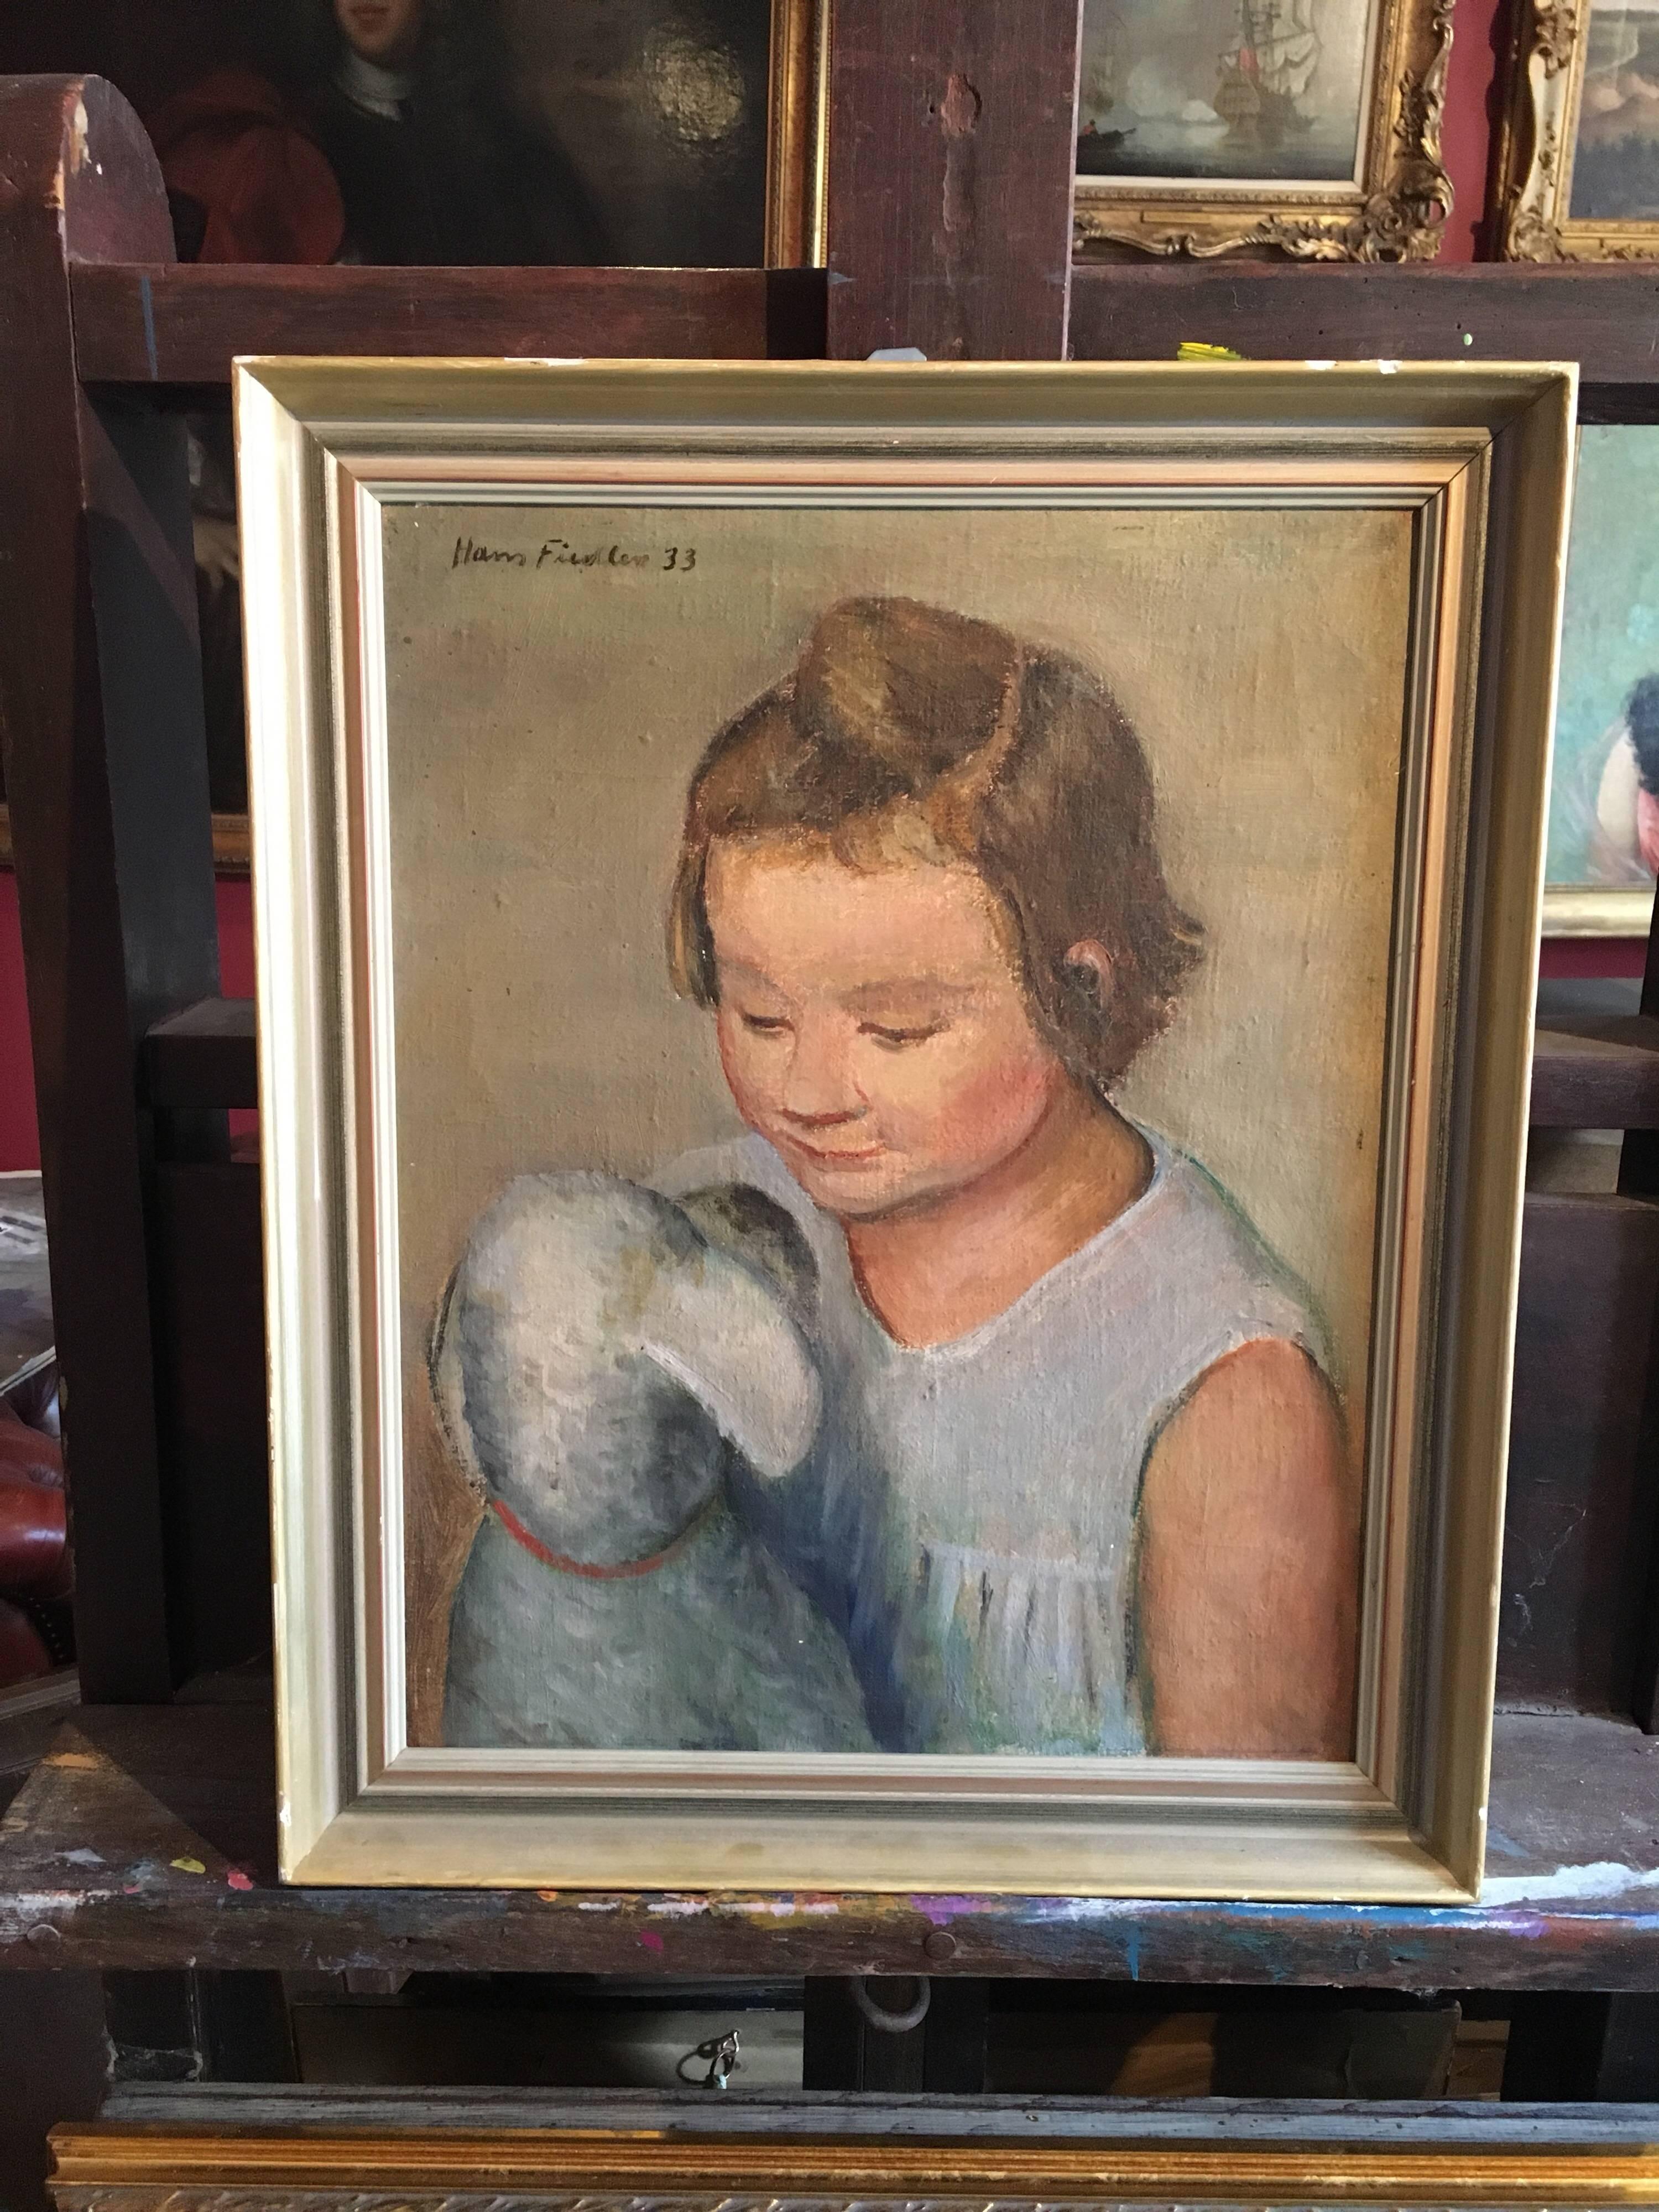 1930's Post-Impressionist Young Girl with her Pet Dog - Painting by Hans Fieldler